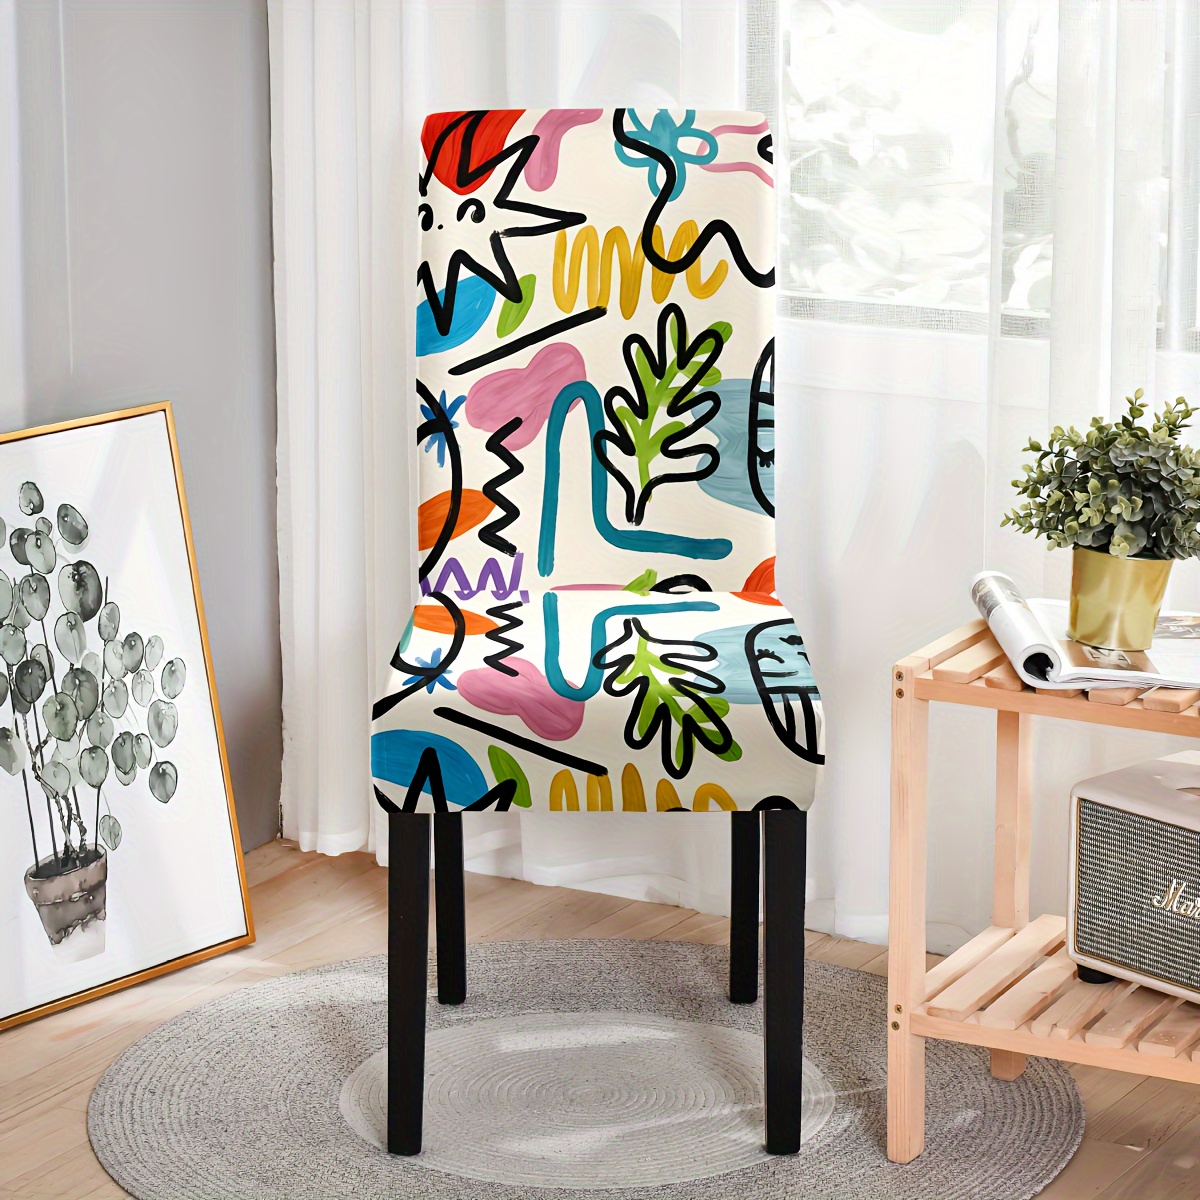 

4/6-piece Vibrant Graffiti Dining Chair Covers - Washable & Replaceable, Soft Stretch Fabric Seat Protectors For Dining, Kitchen, Office, And Living Room Decor